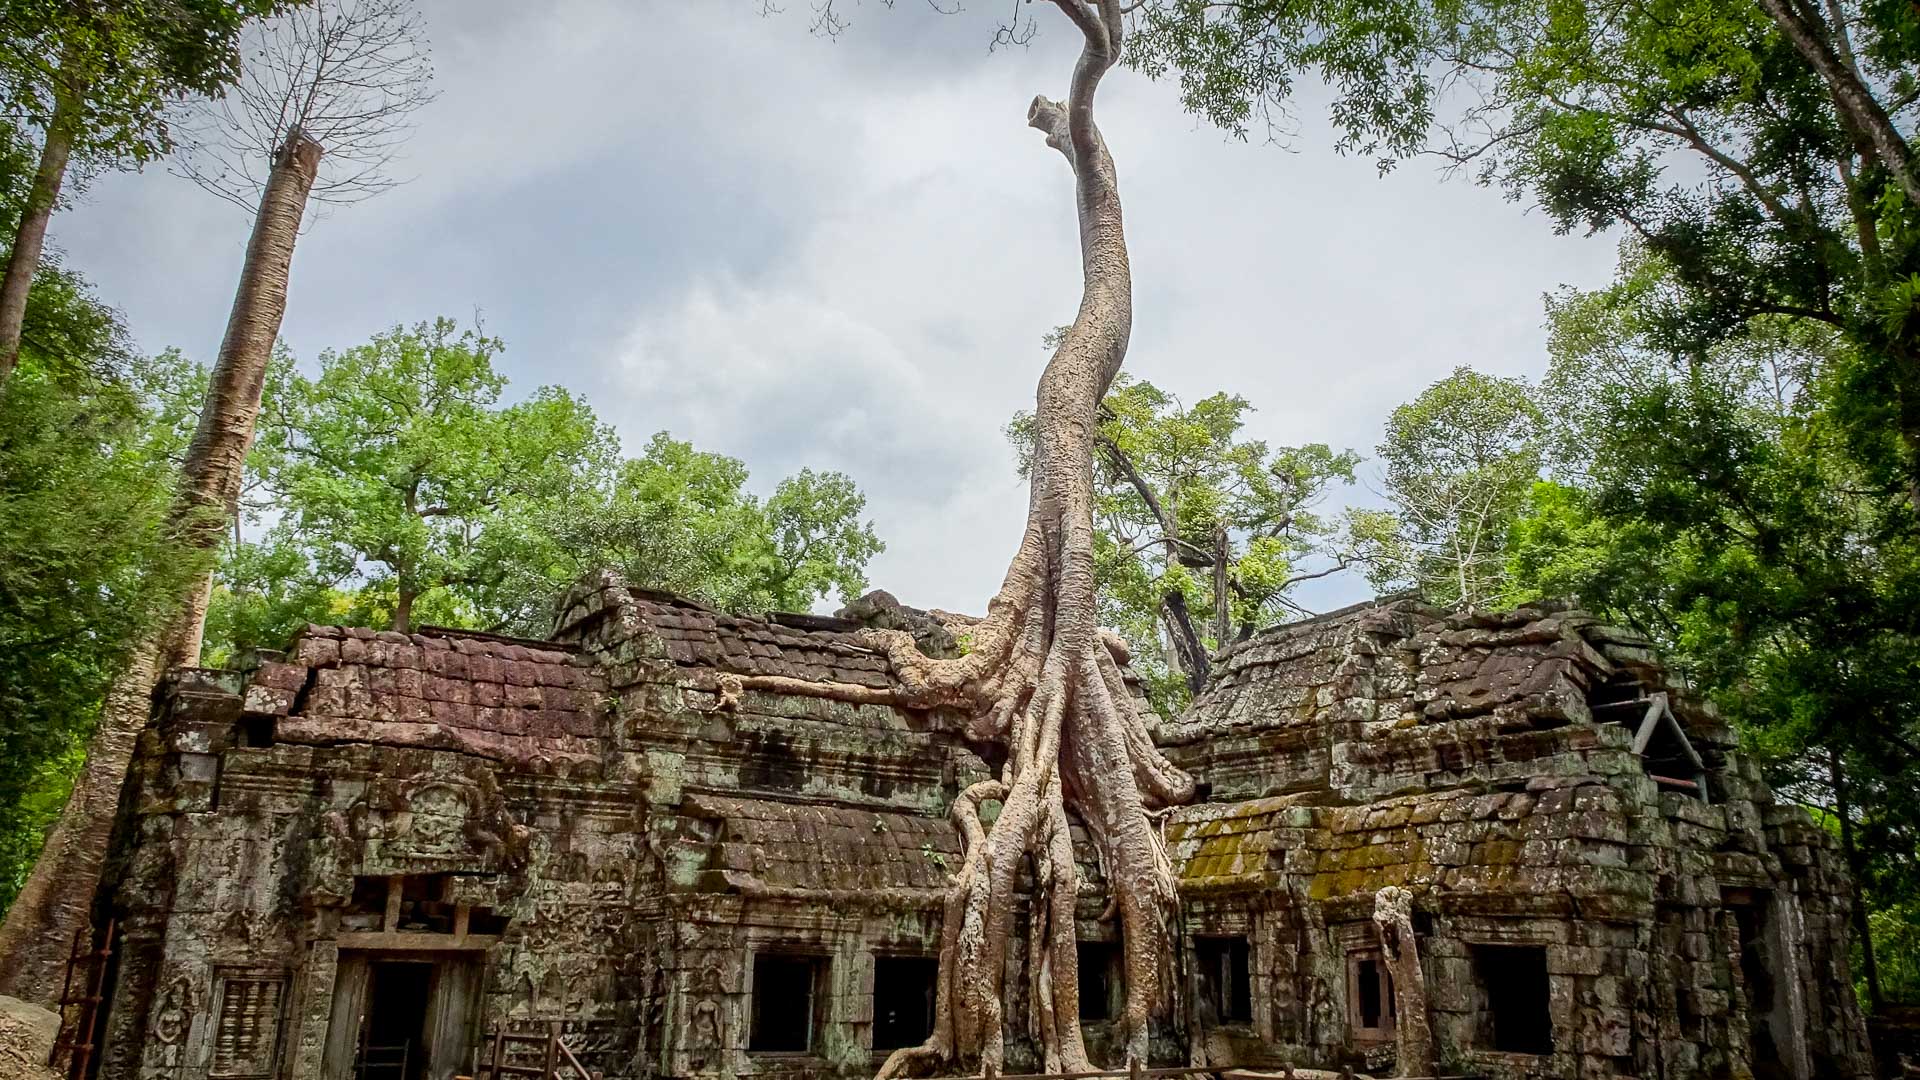 The ruins of the Ta Prohm temple hiding in the jungle in Siem Reap.